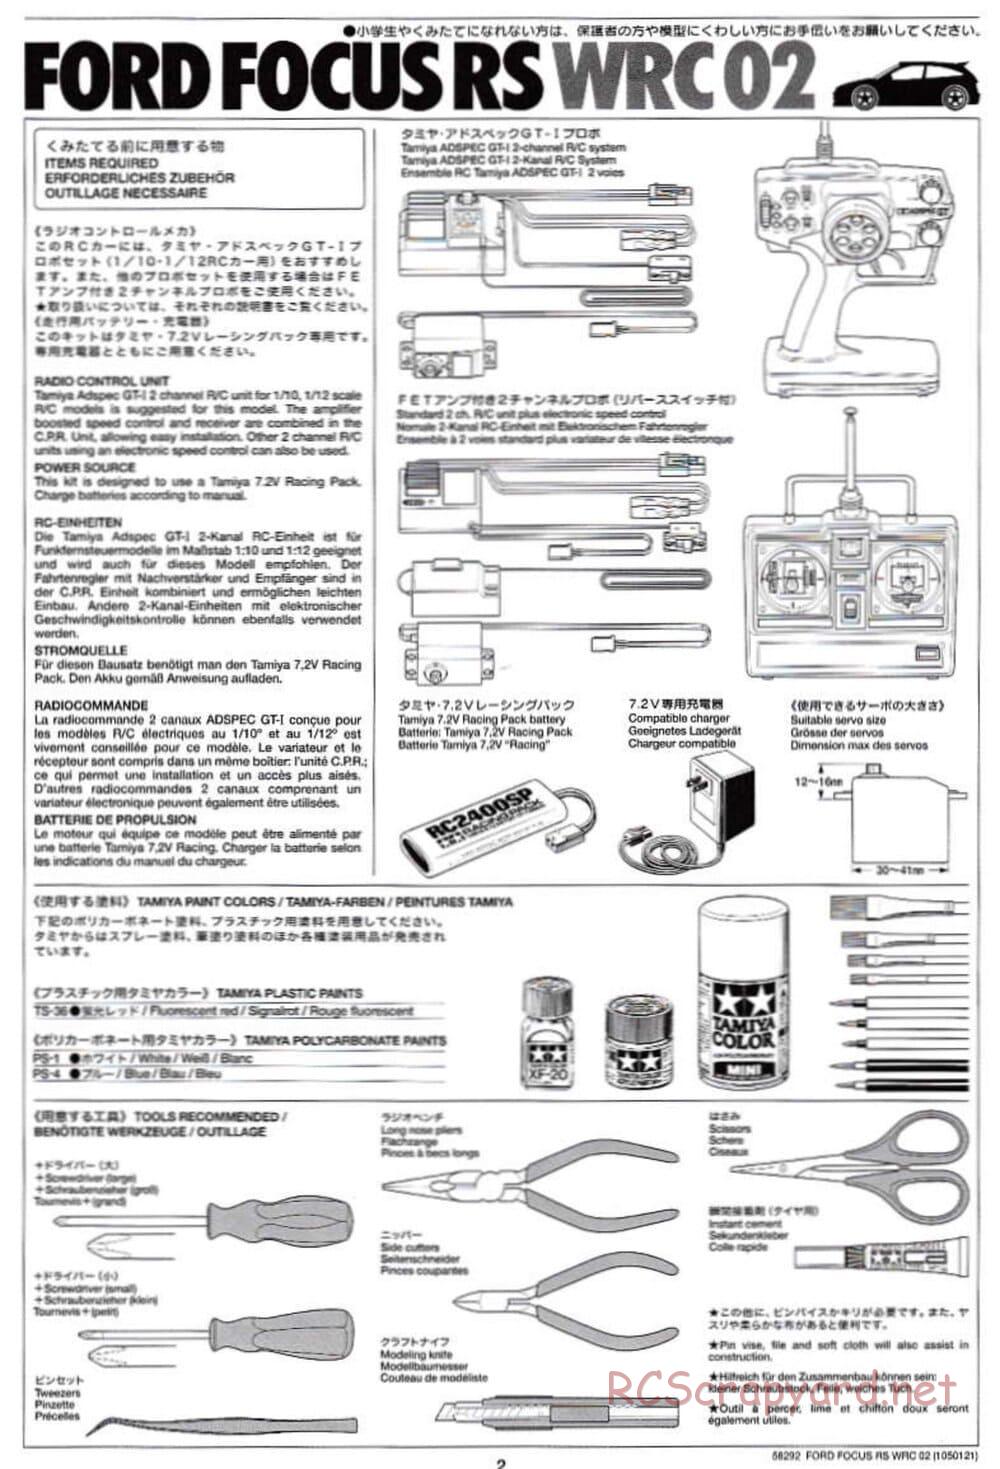 Tamiya - Ford Focus RS WRC 02 - TL-01 Chassis - Manual - Page 2